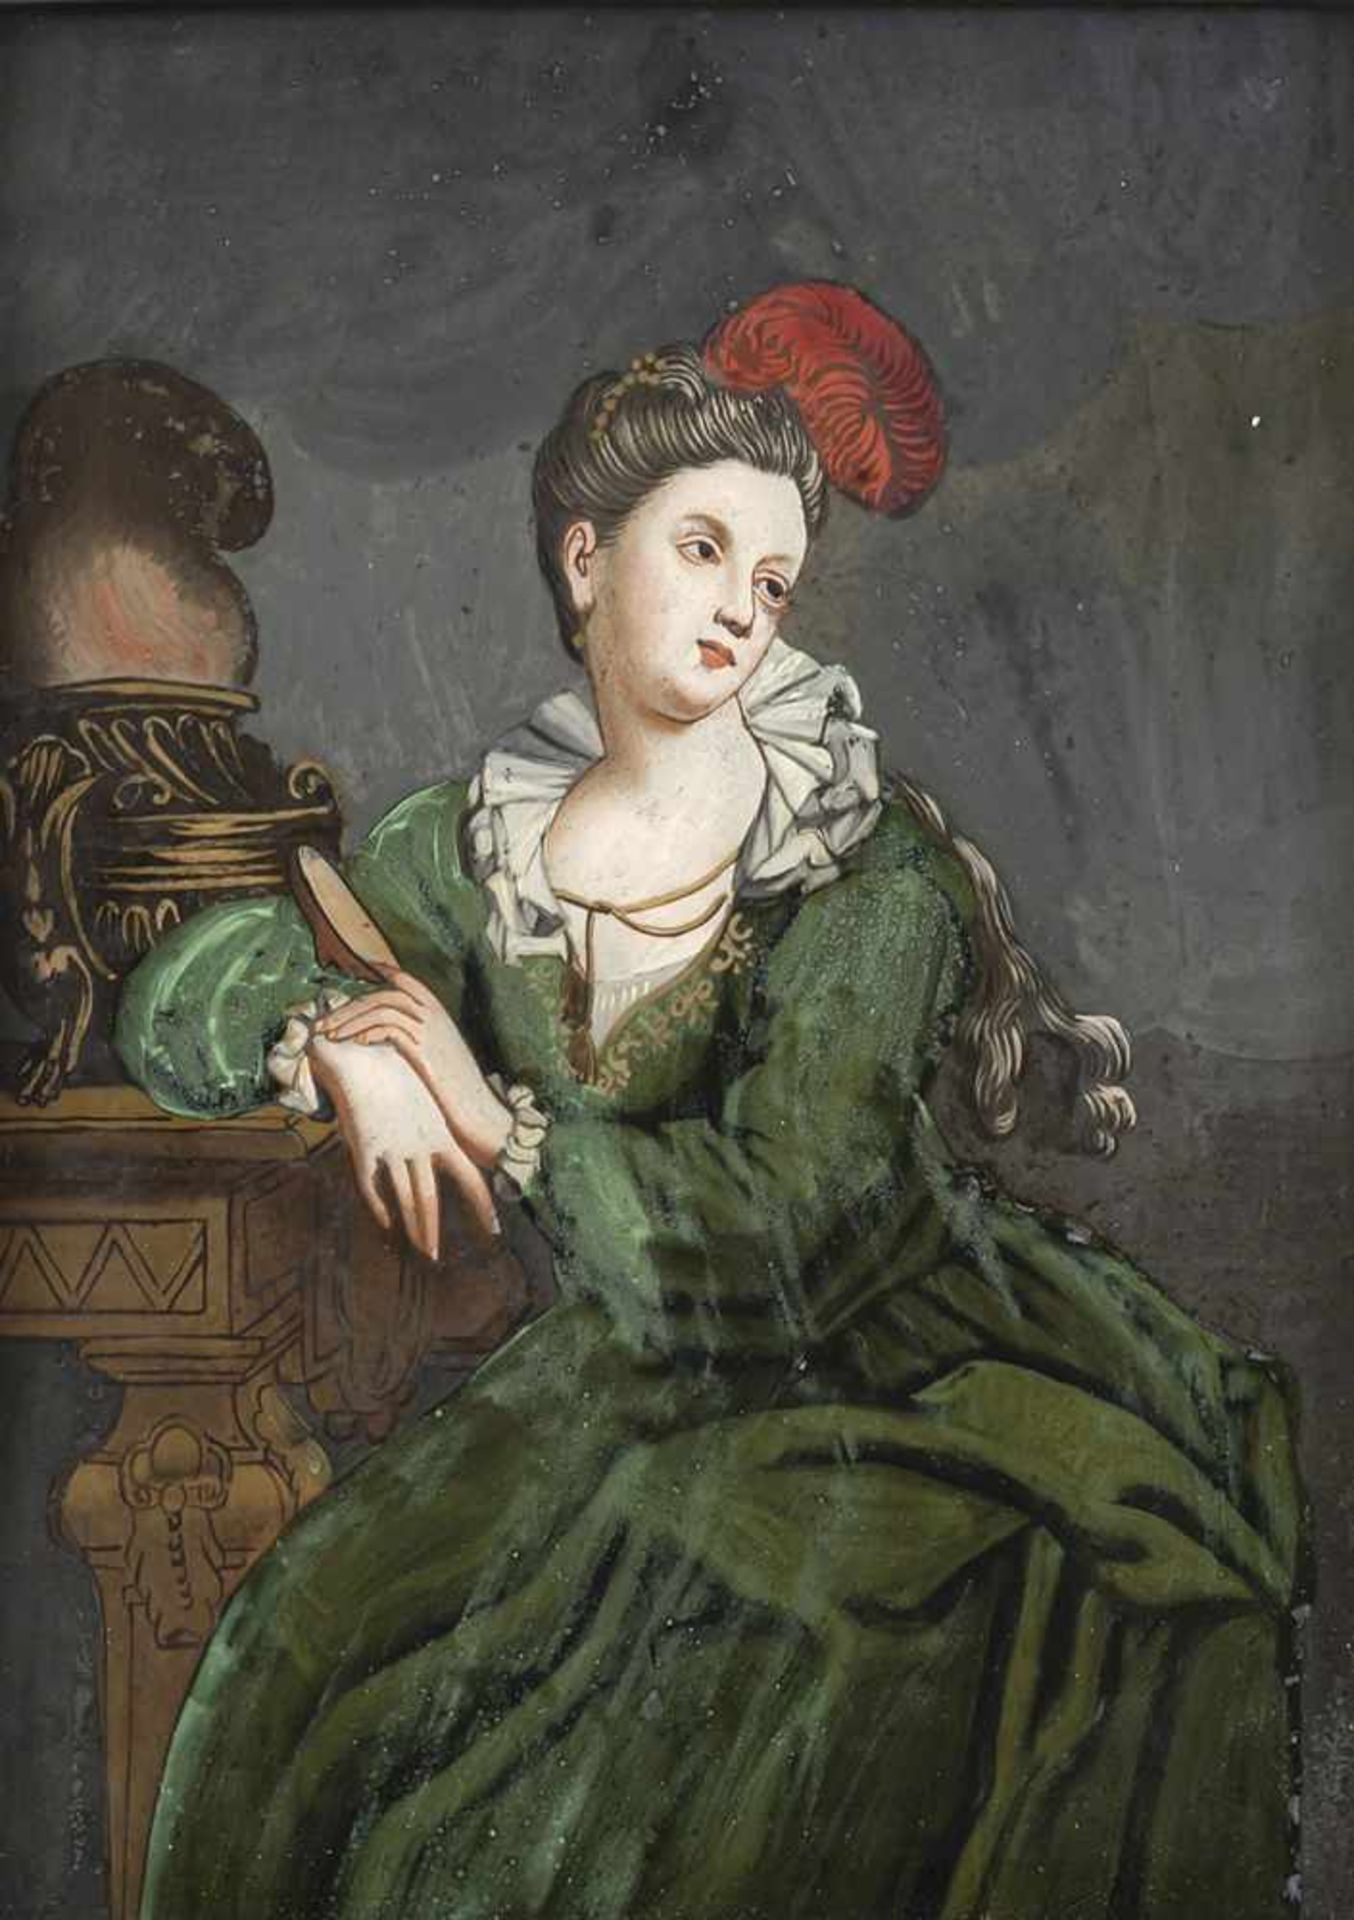 A GLASS PAINTING ON REVERSE, South German, c. 1730/40. A lady in a green dress. Minor wear.